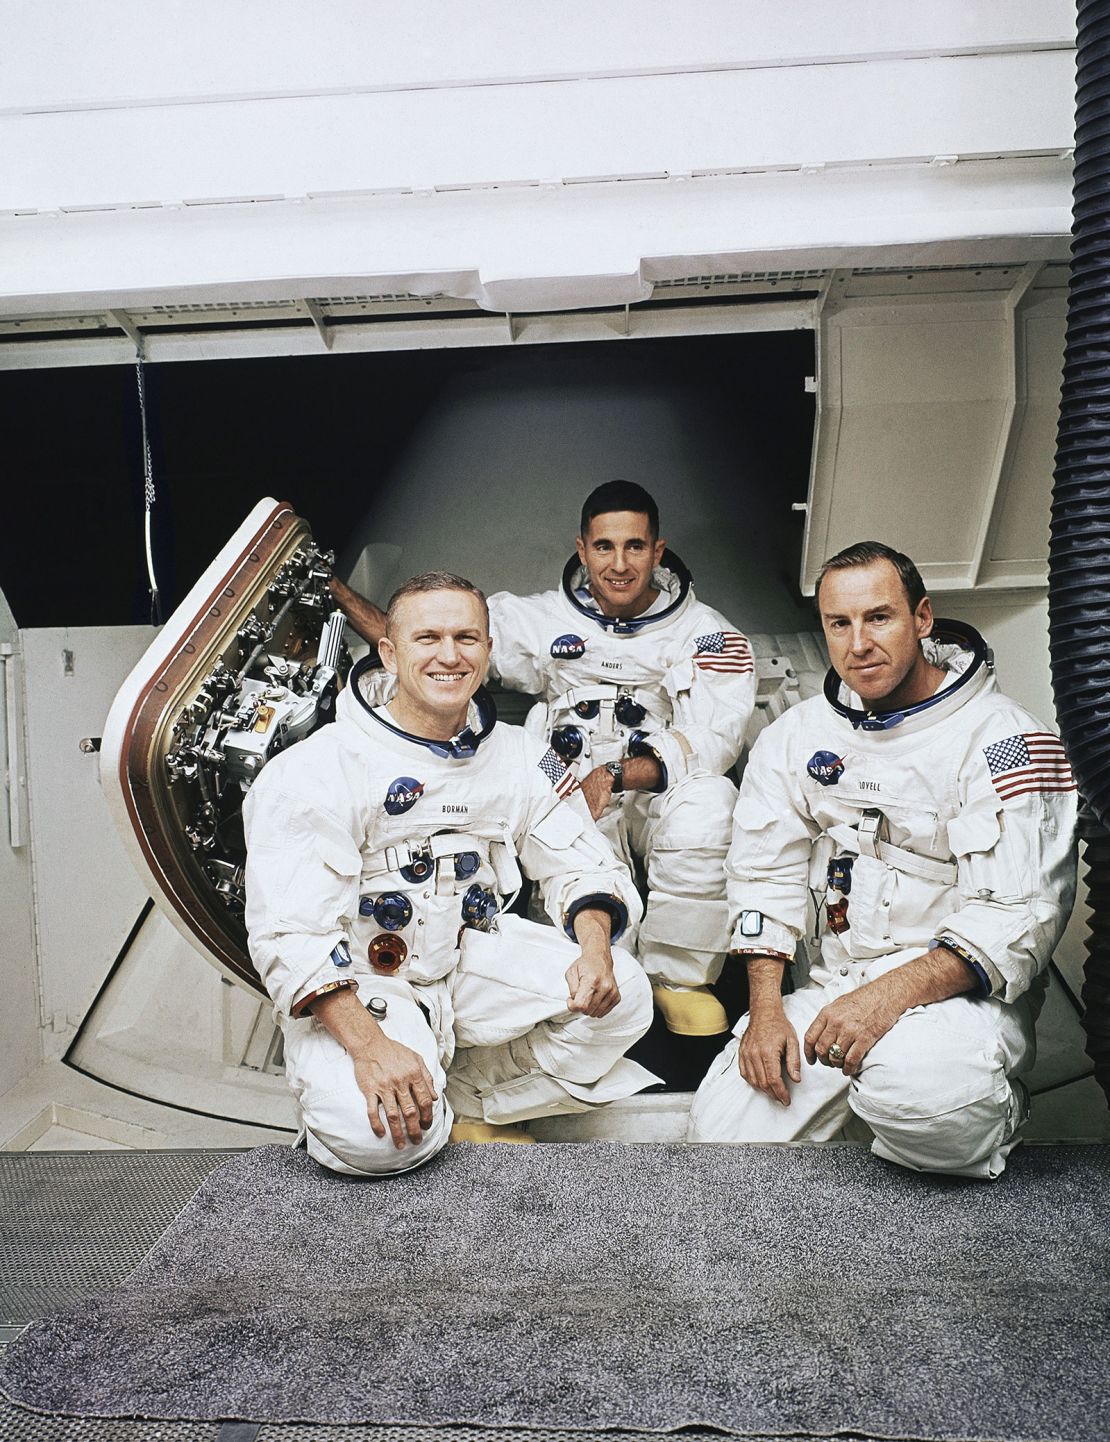 Left to right: Frank Borman, commander of 3-man Apollo 8 crew, William A. Anders and James A. Lovell, Jr., Dec. 21, 1968. They will attempt an orbital flight around the moon during the Christmas holidays. (AP Photo)